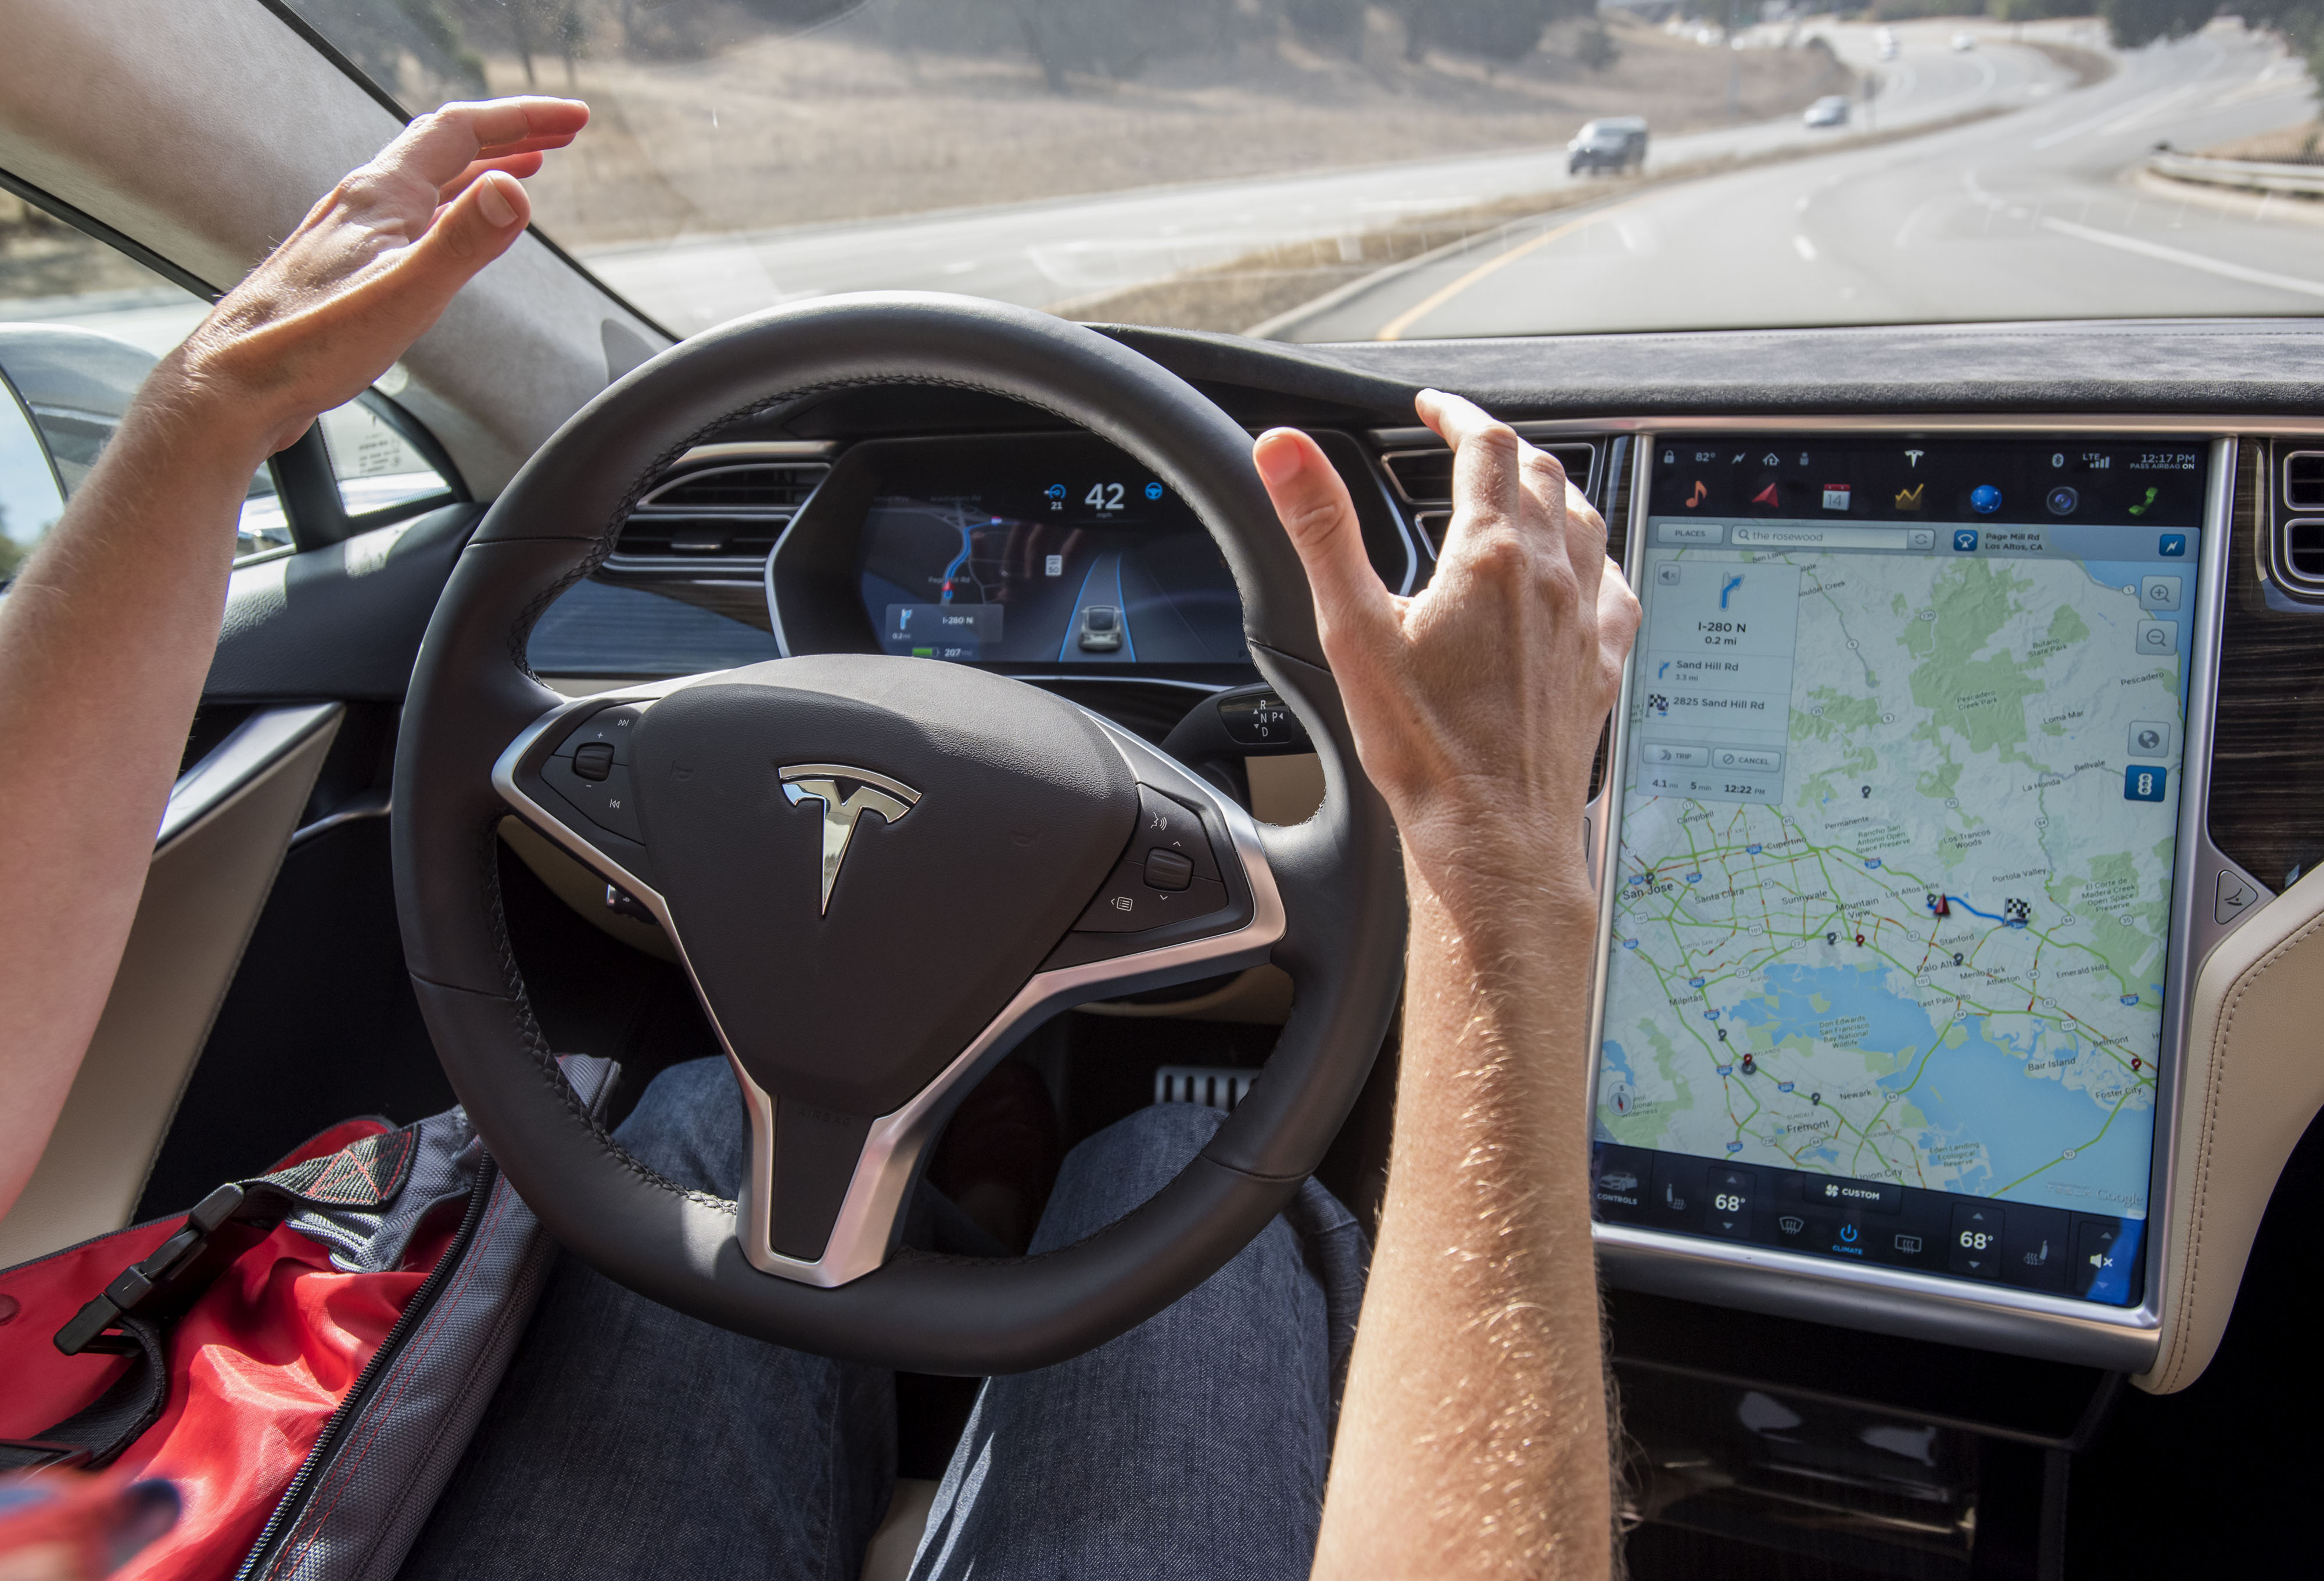 In this Oct. 14, 2015 file photo, a member of the media test drives a Tesla Model S car equipped with Autopilot in Palo Alto, California, U.S. (David Paul Morris—Bloomberg/Getty Images)